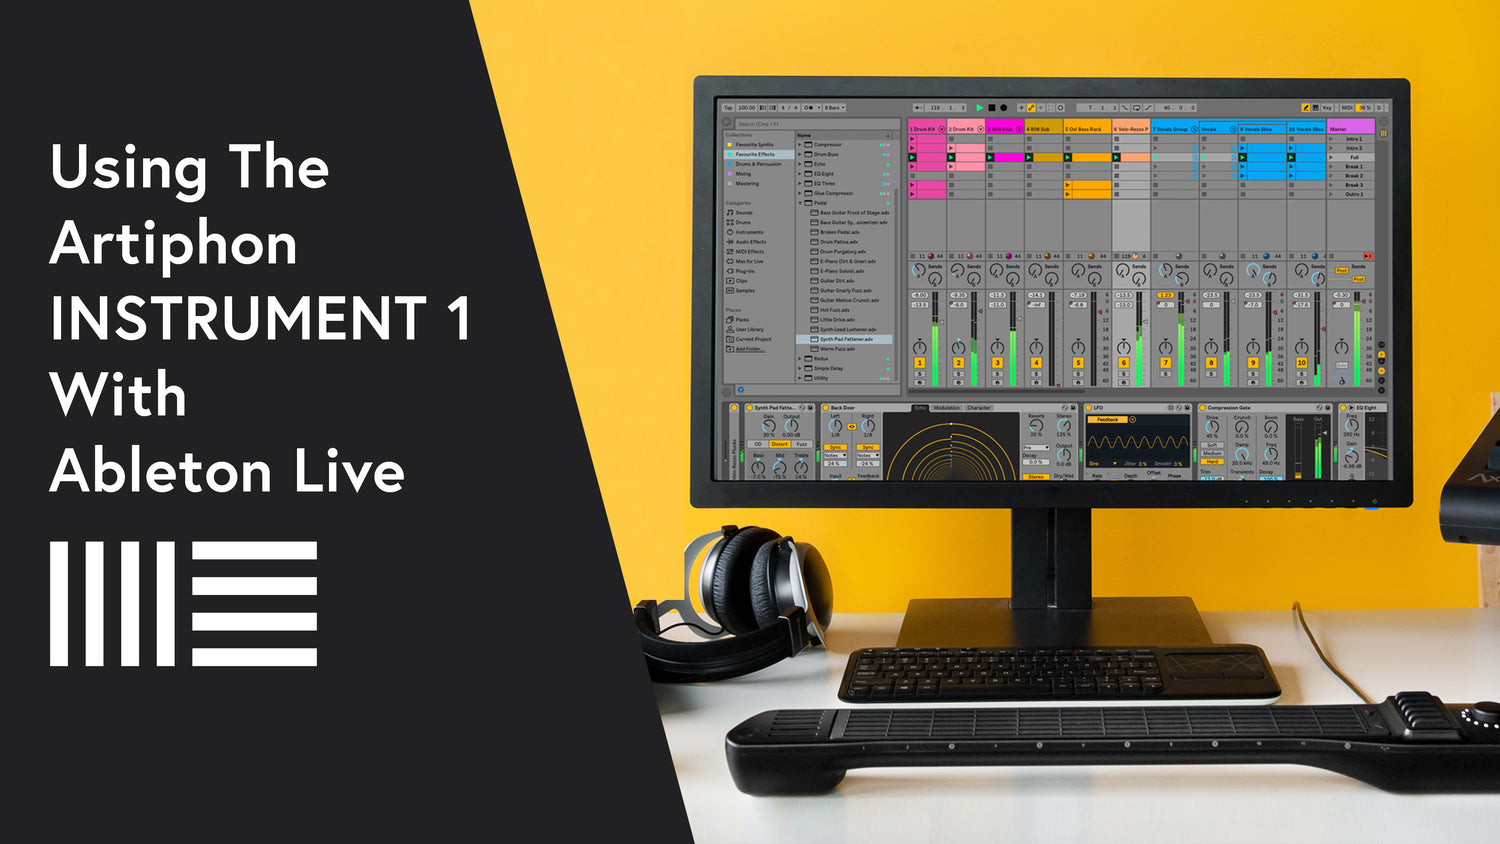 How to get the most out of  Ableton Live 10 with the Artiphon INSTRUMENT 1